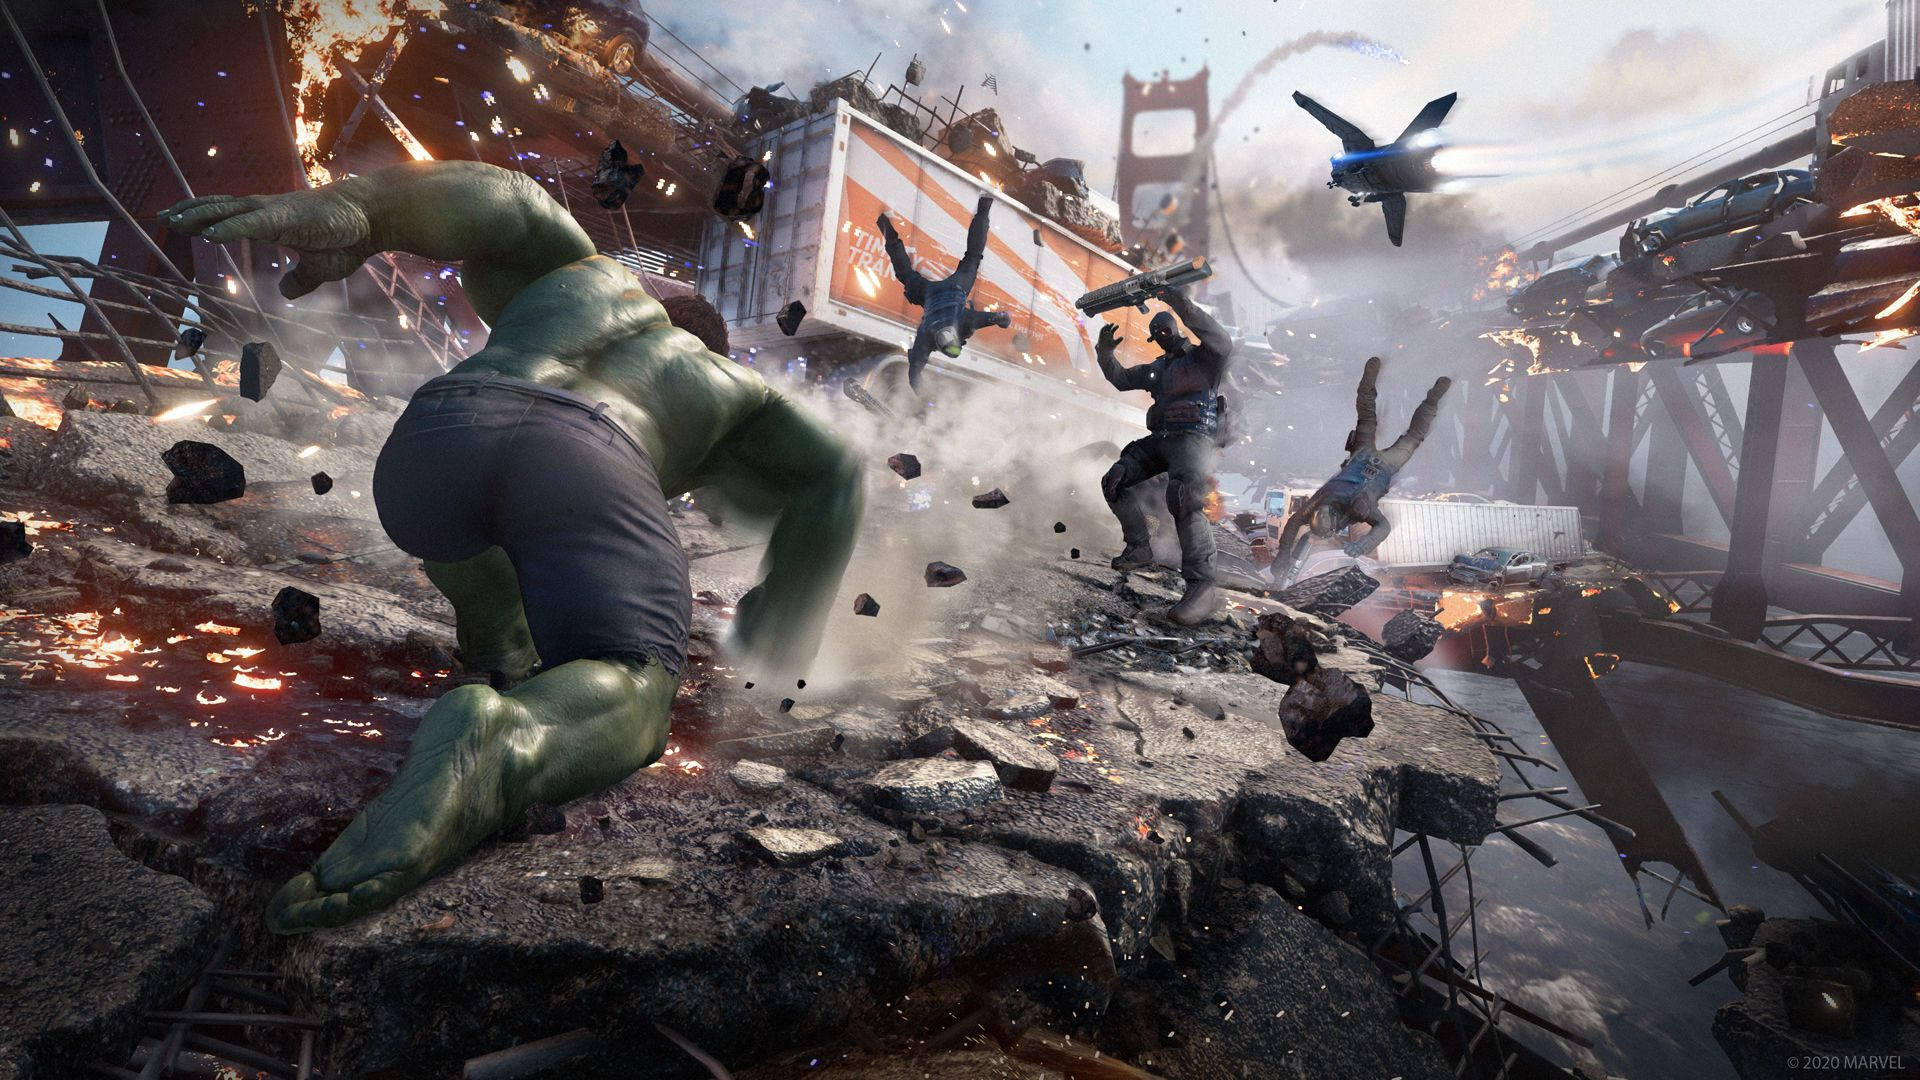 "Experience Marvel adventures done Avengers style with the new PlayStation 4 game!" Wallpaper